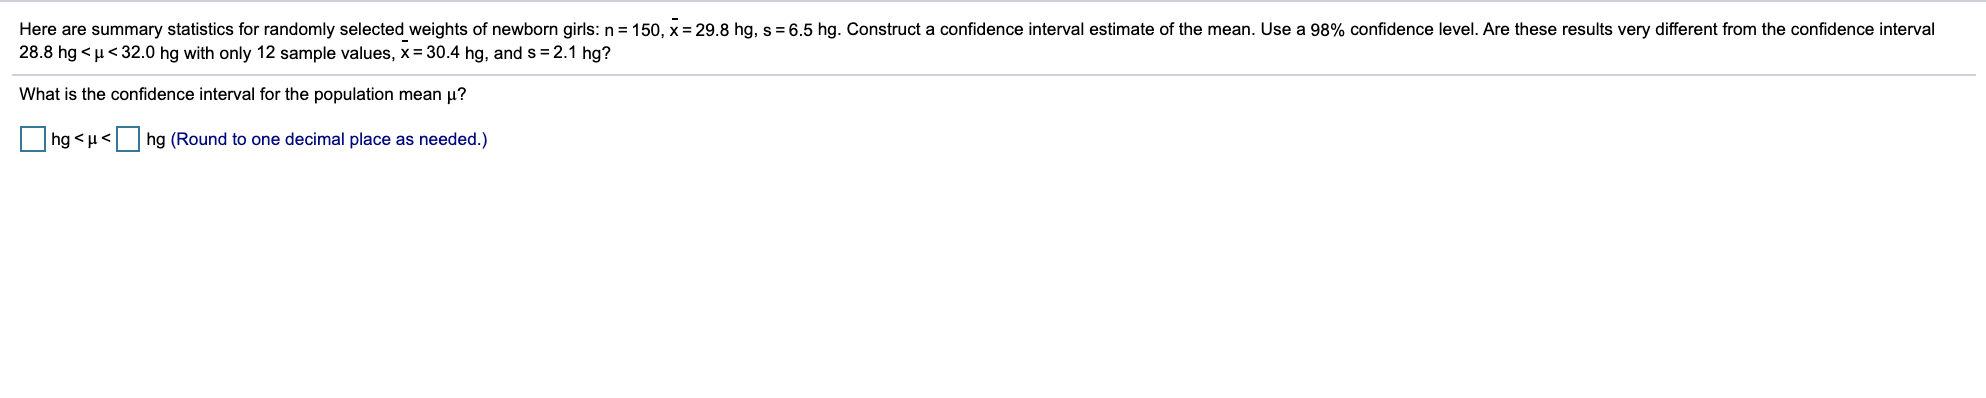 Here are summary statistics for randomly selected weights of newborn girls: n = 150, x = 29.8 hg, s = 6.5 hg. Construct a confidence interval estimate of the mean. Use a 98% confidence level. Are these results very different from the confidence interval
28.8 hg < µ< 32.0 hg with only 12 sample values, x= 30.4 hg, and s= 2.1 hg?
What is the confidence interval for the population mean µ?
hg <u< hg (Round to one decimal place as needed.)
